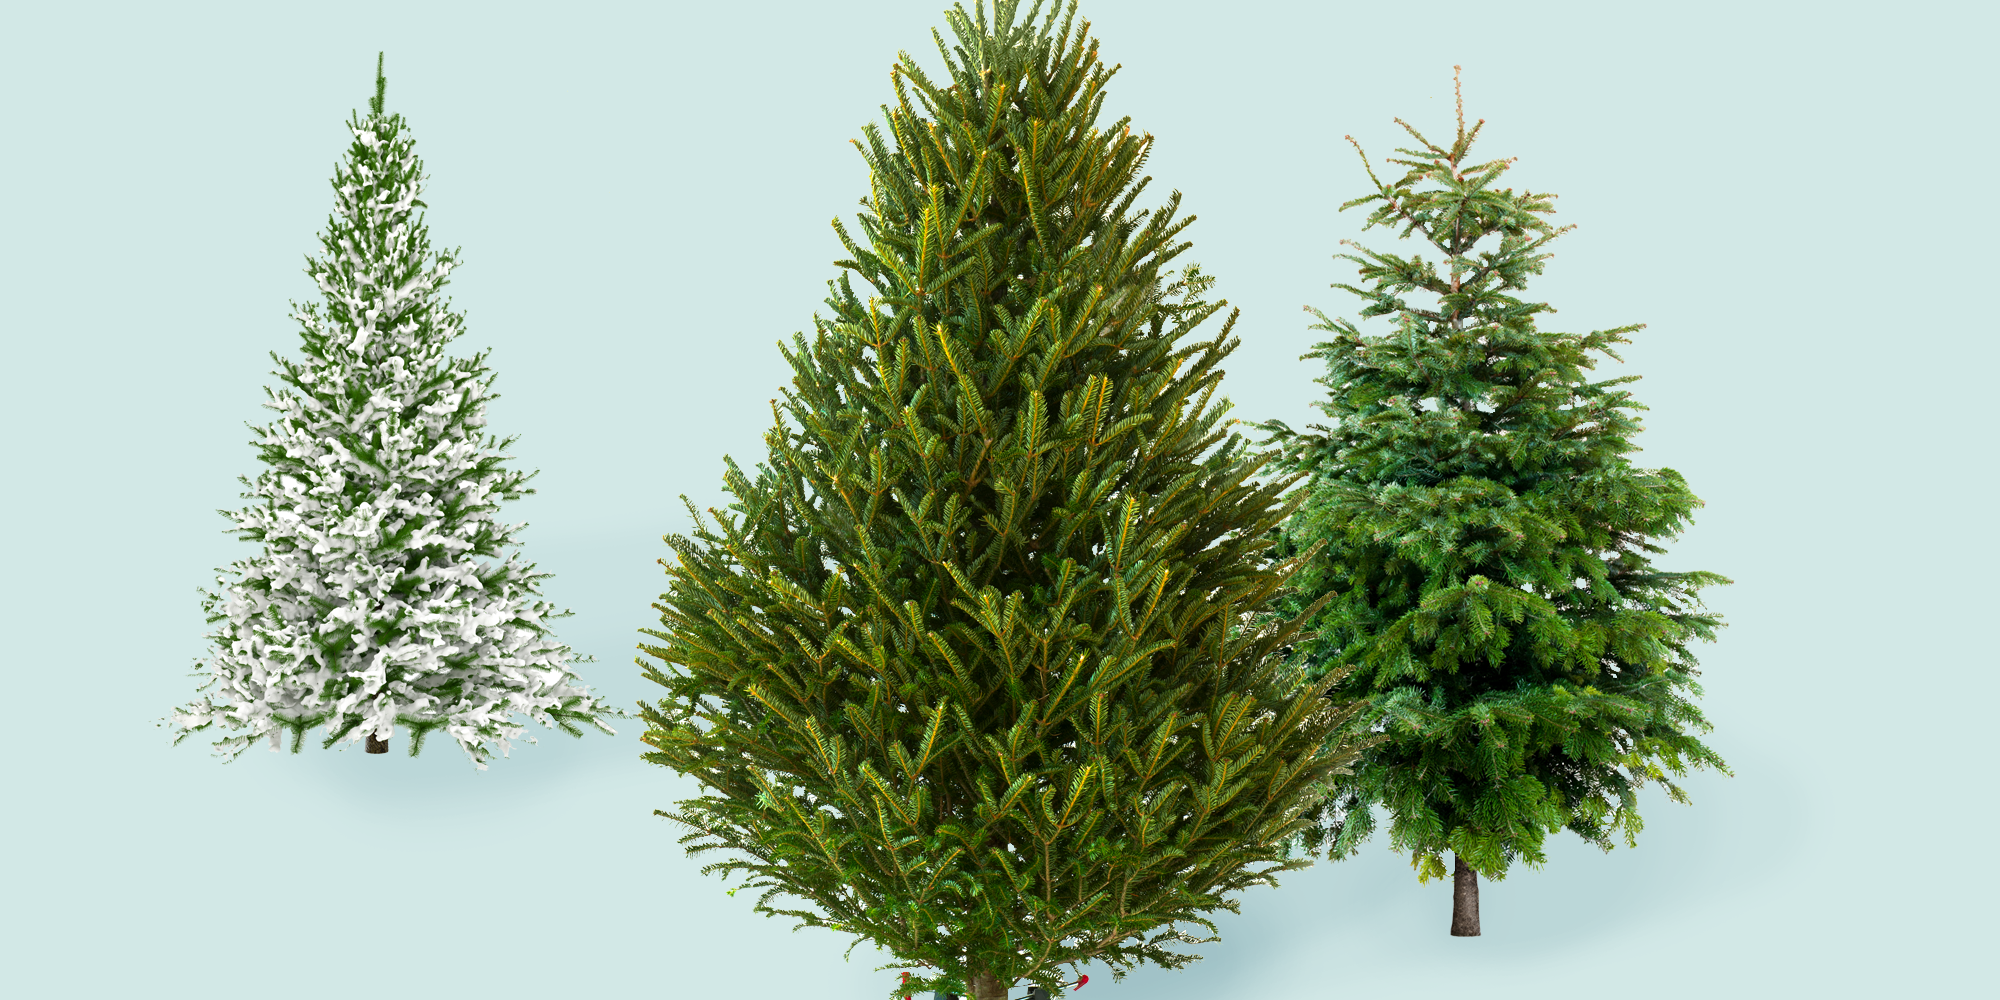 9 Best Christmas Tree Delivery Services 2021 - Real Christmas Tree Delivery and Set Up